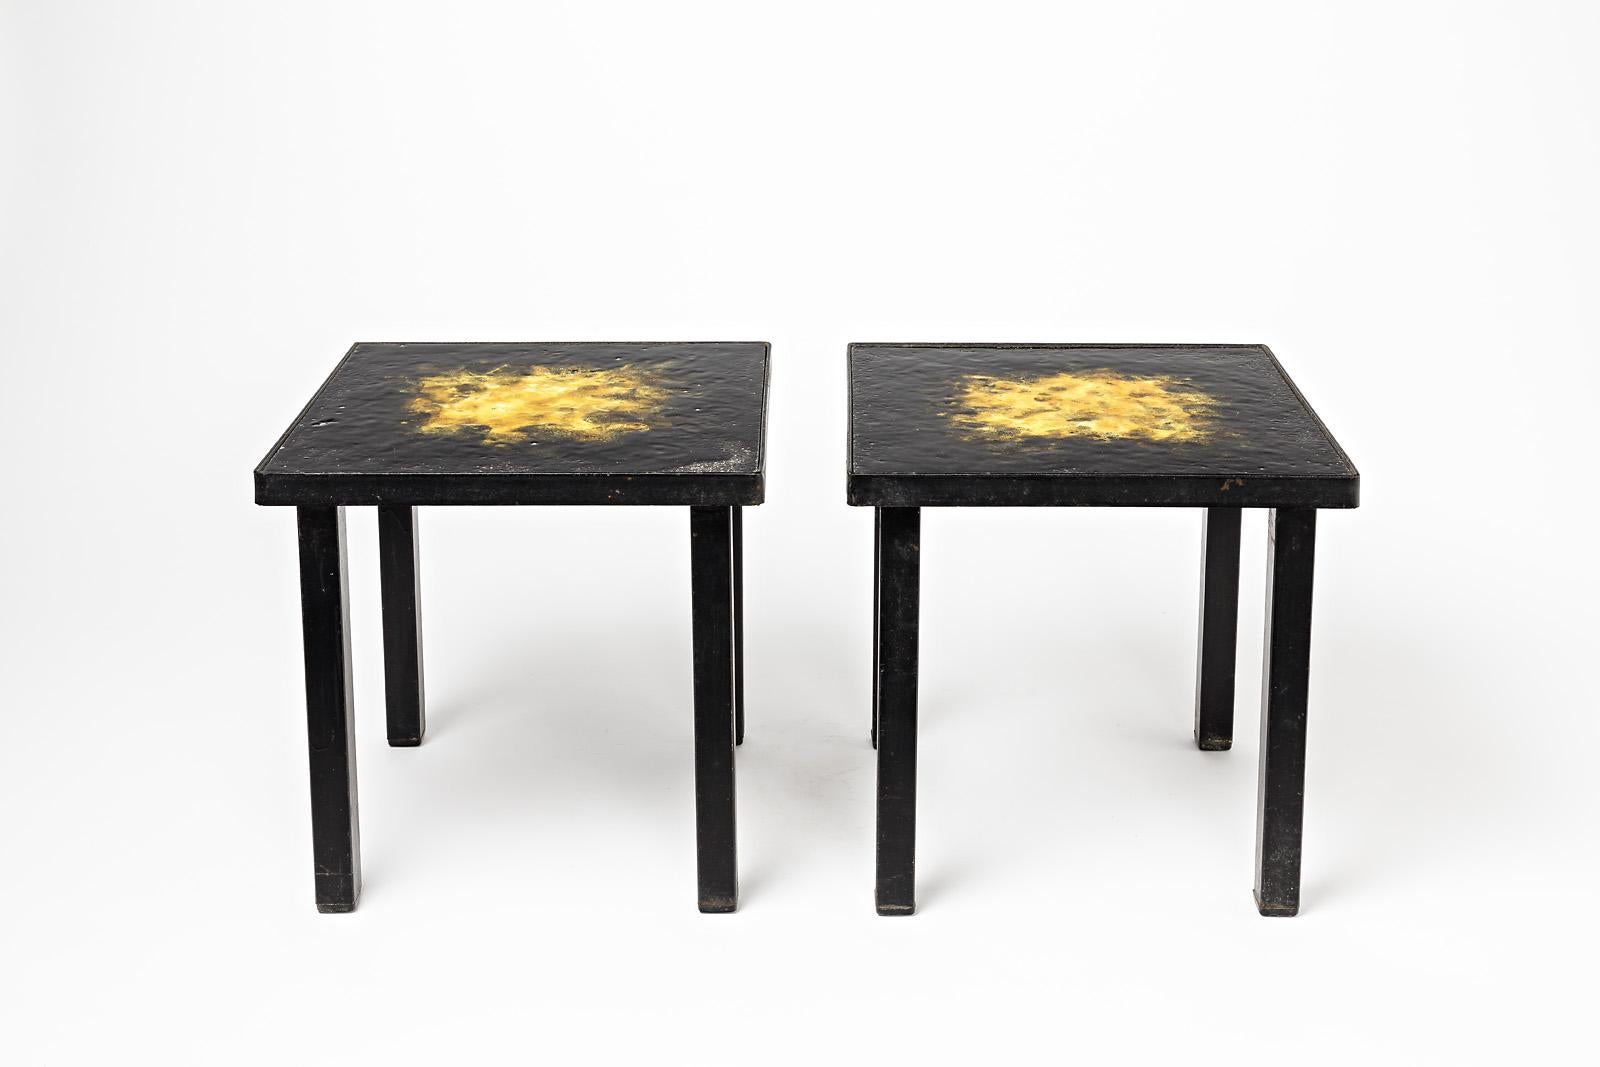 Pair of Ceramic Low Coffee Tables Shinny Black and Yellow, circa 1970 For Sale 2